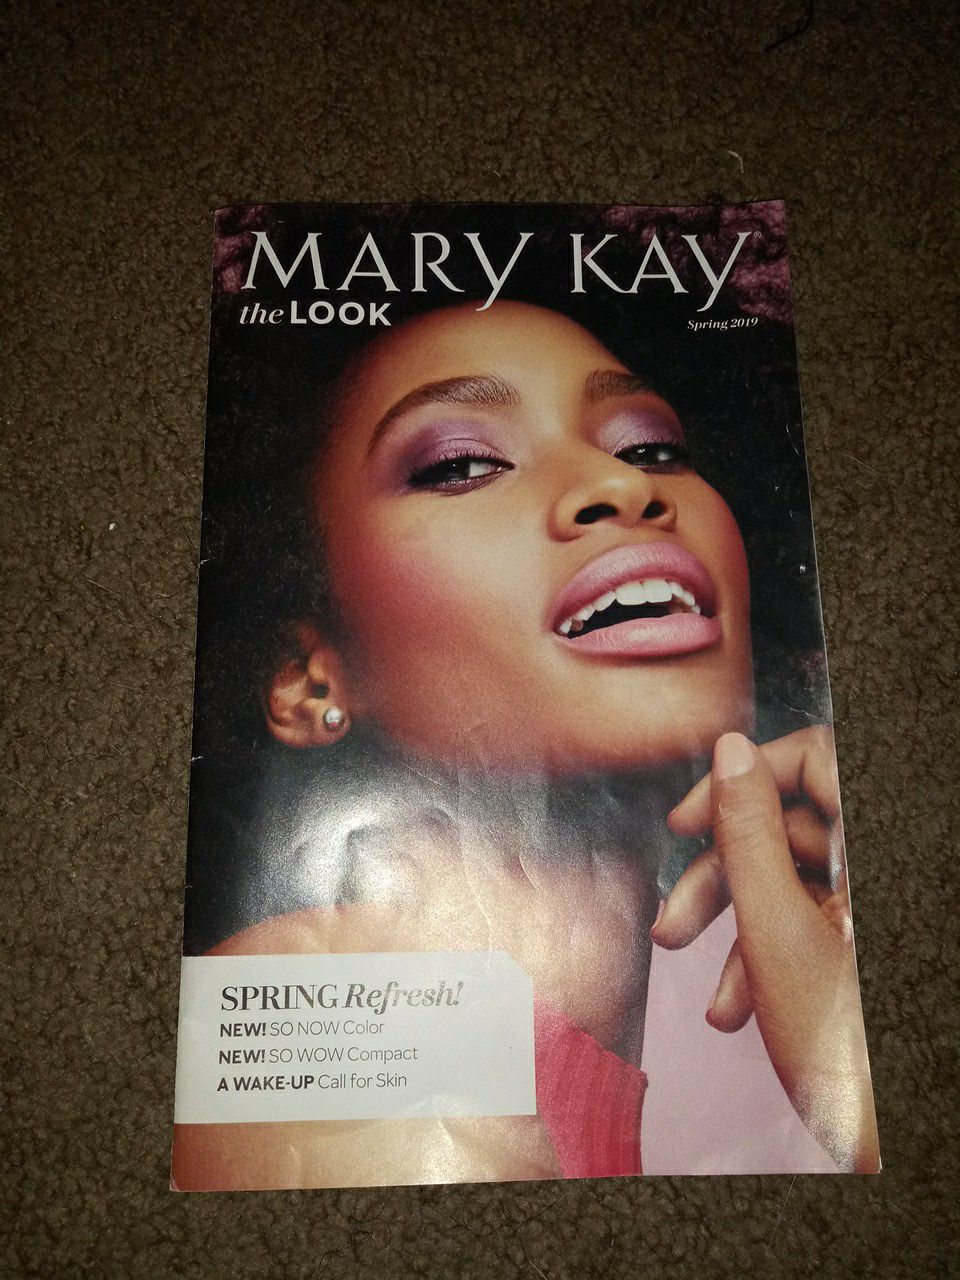 I sell all Mary Kay products